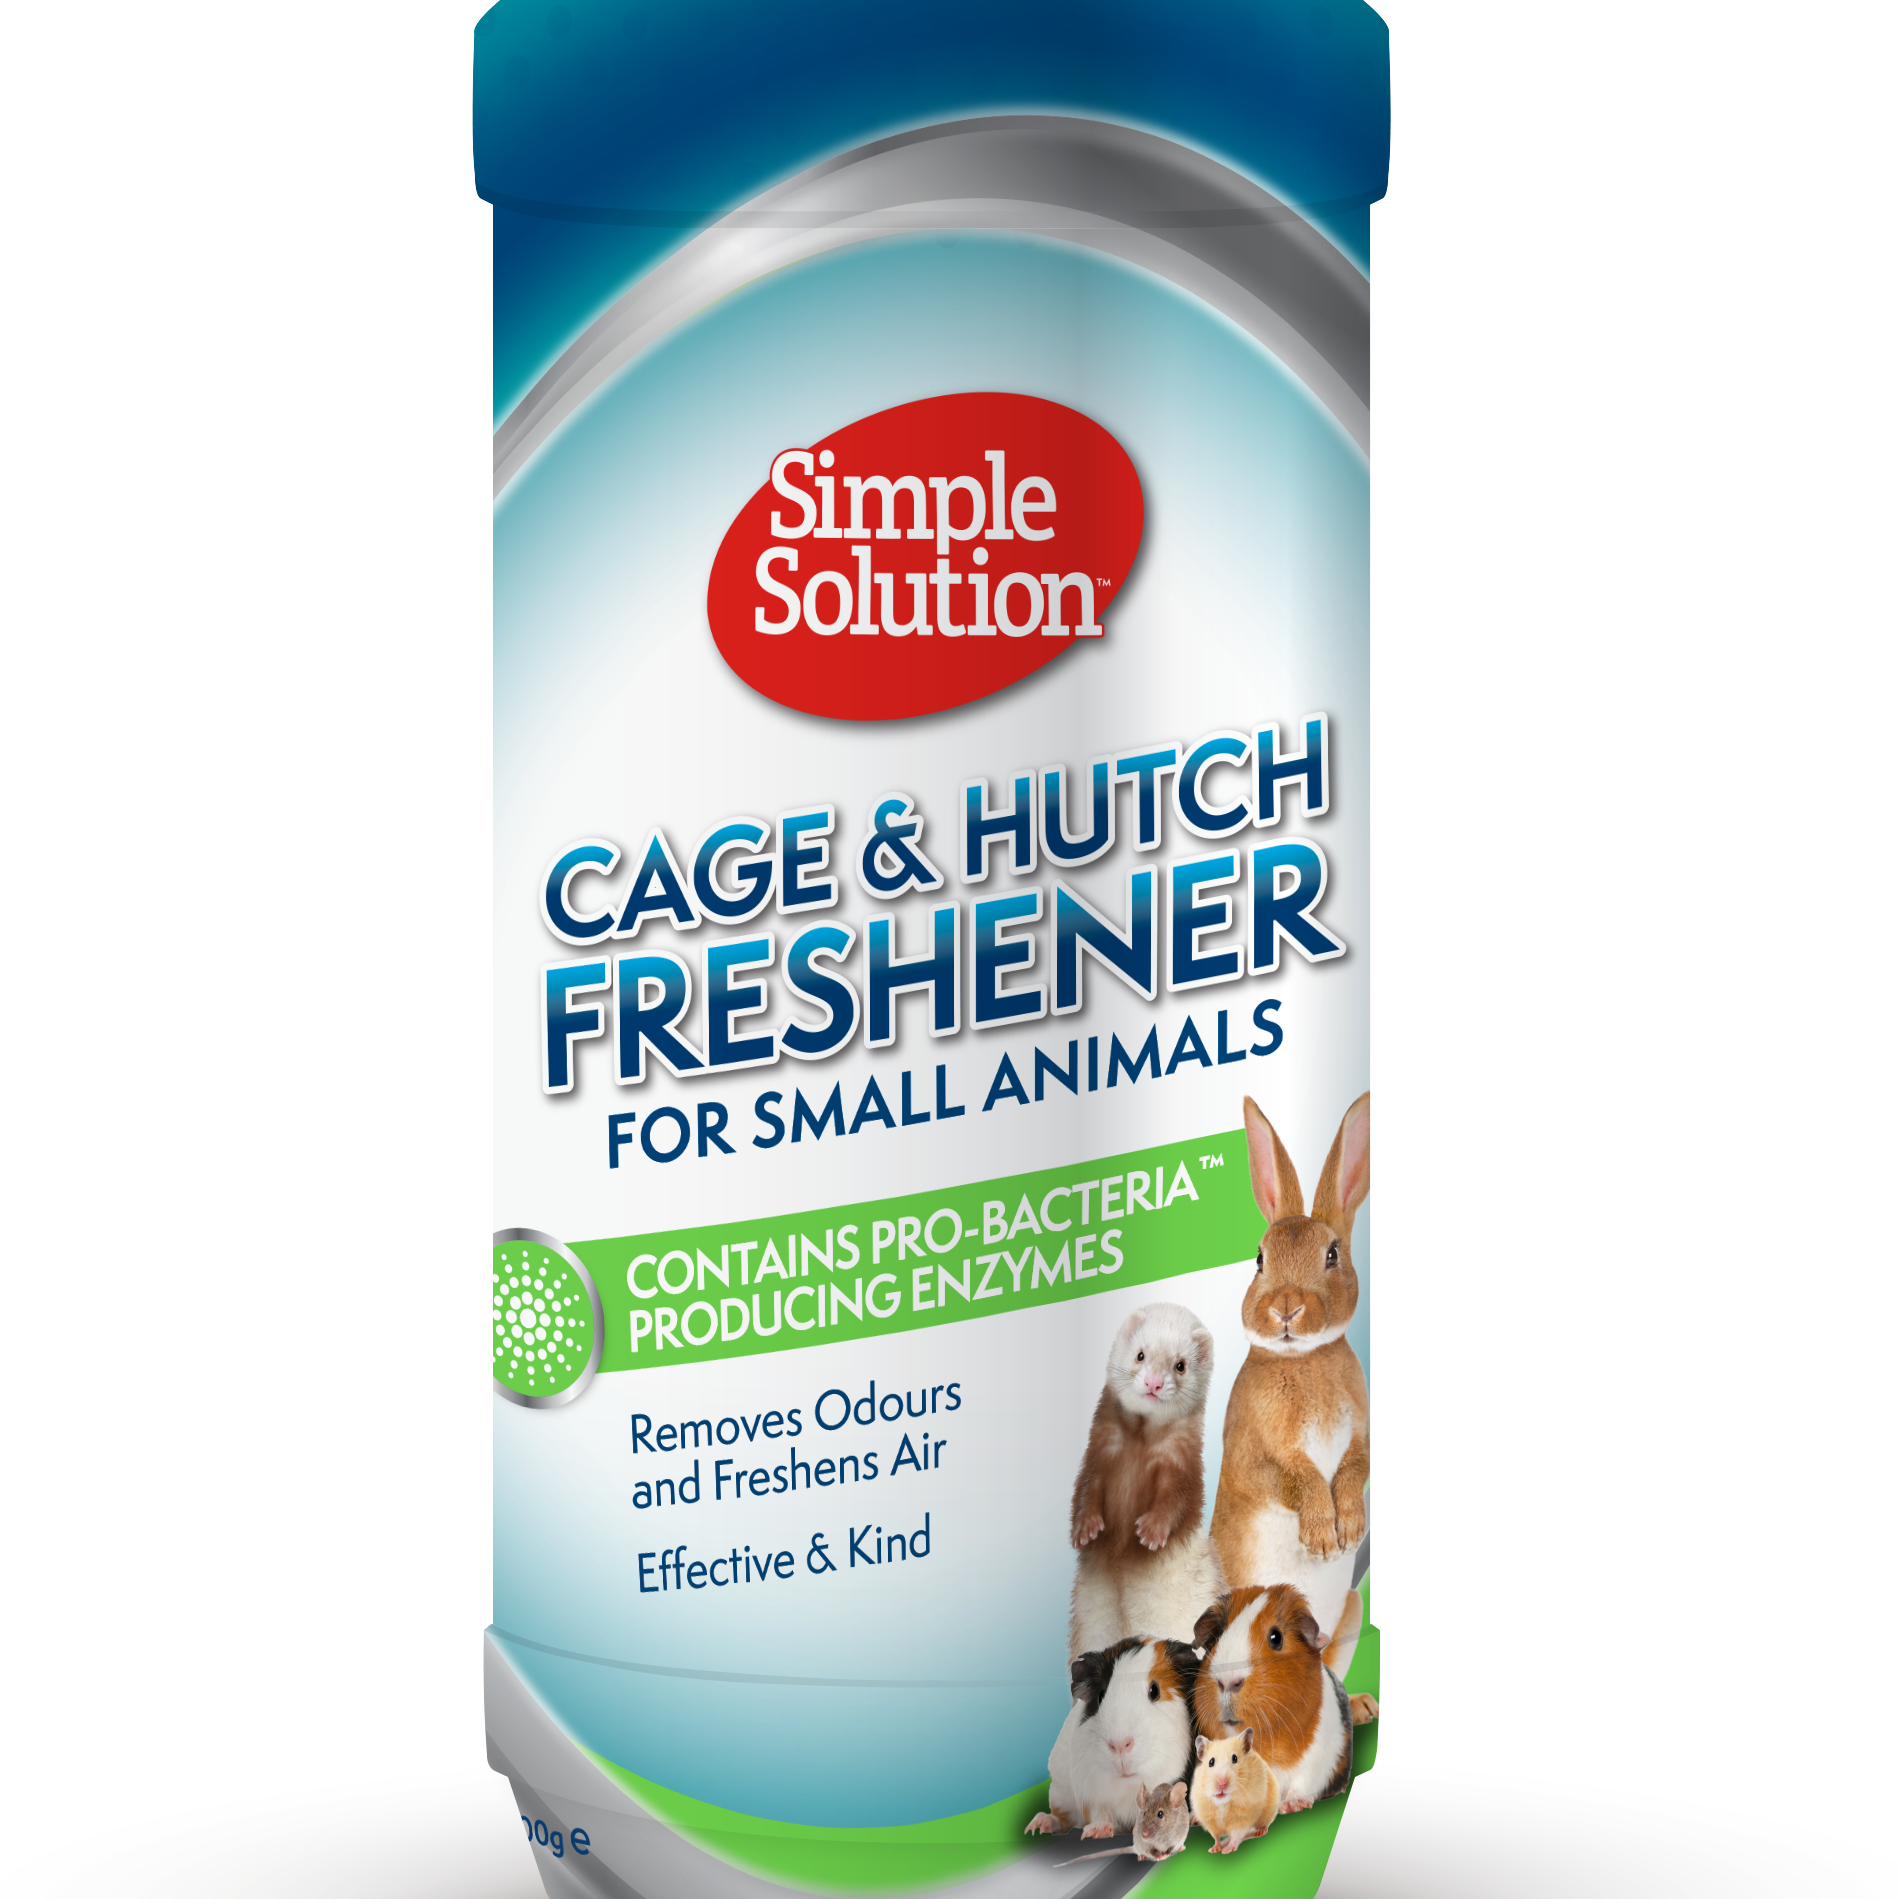 SS-UK-600g-Cage-Hutch-Freshener-for-Small-Animal-90559-Virtual-Front-3.png